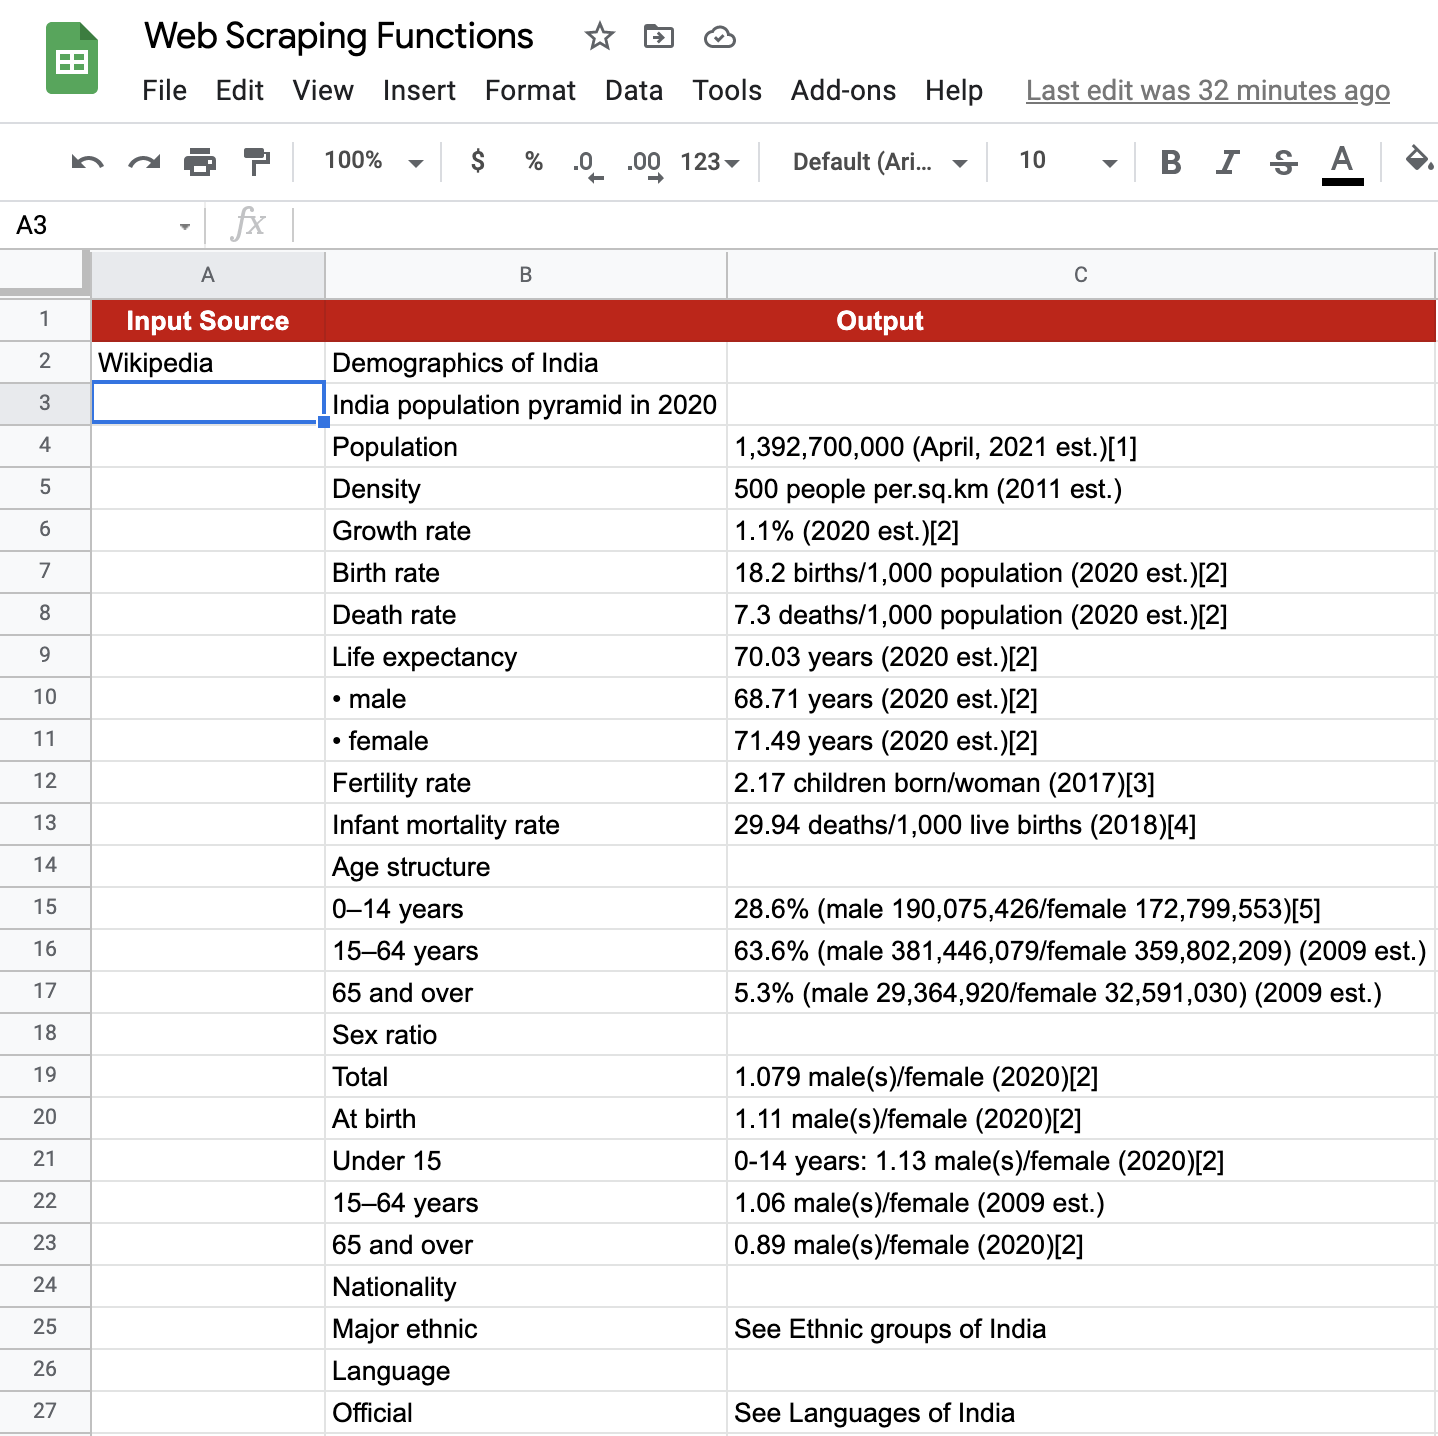 IMPORTHTML function in Google Sheets